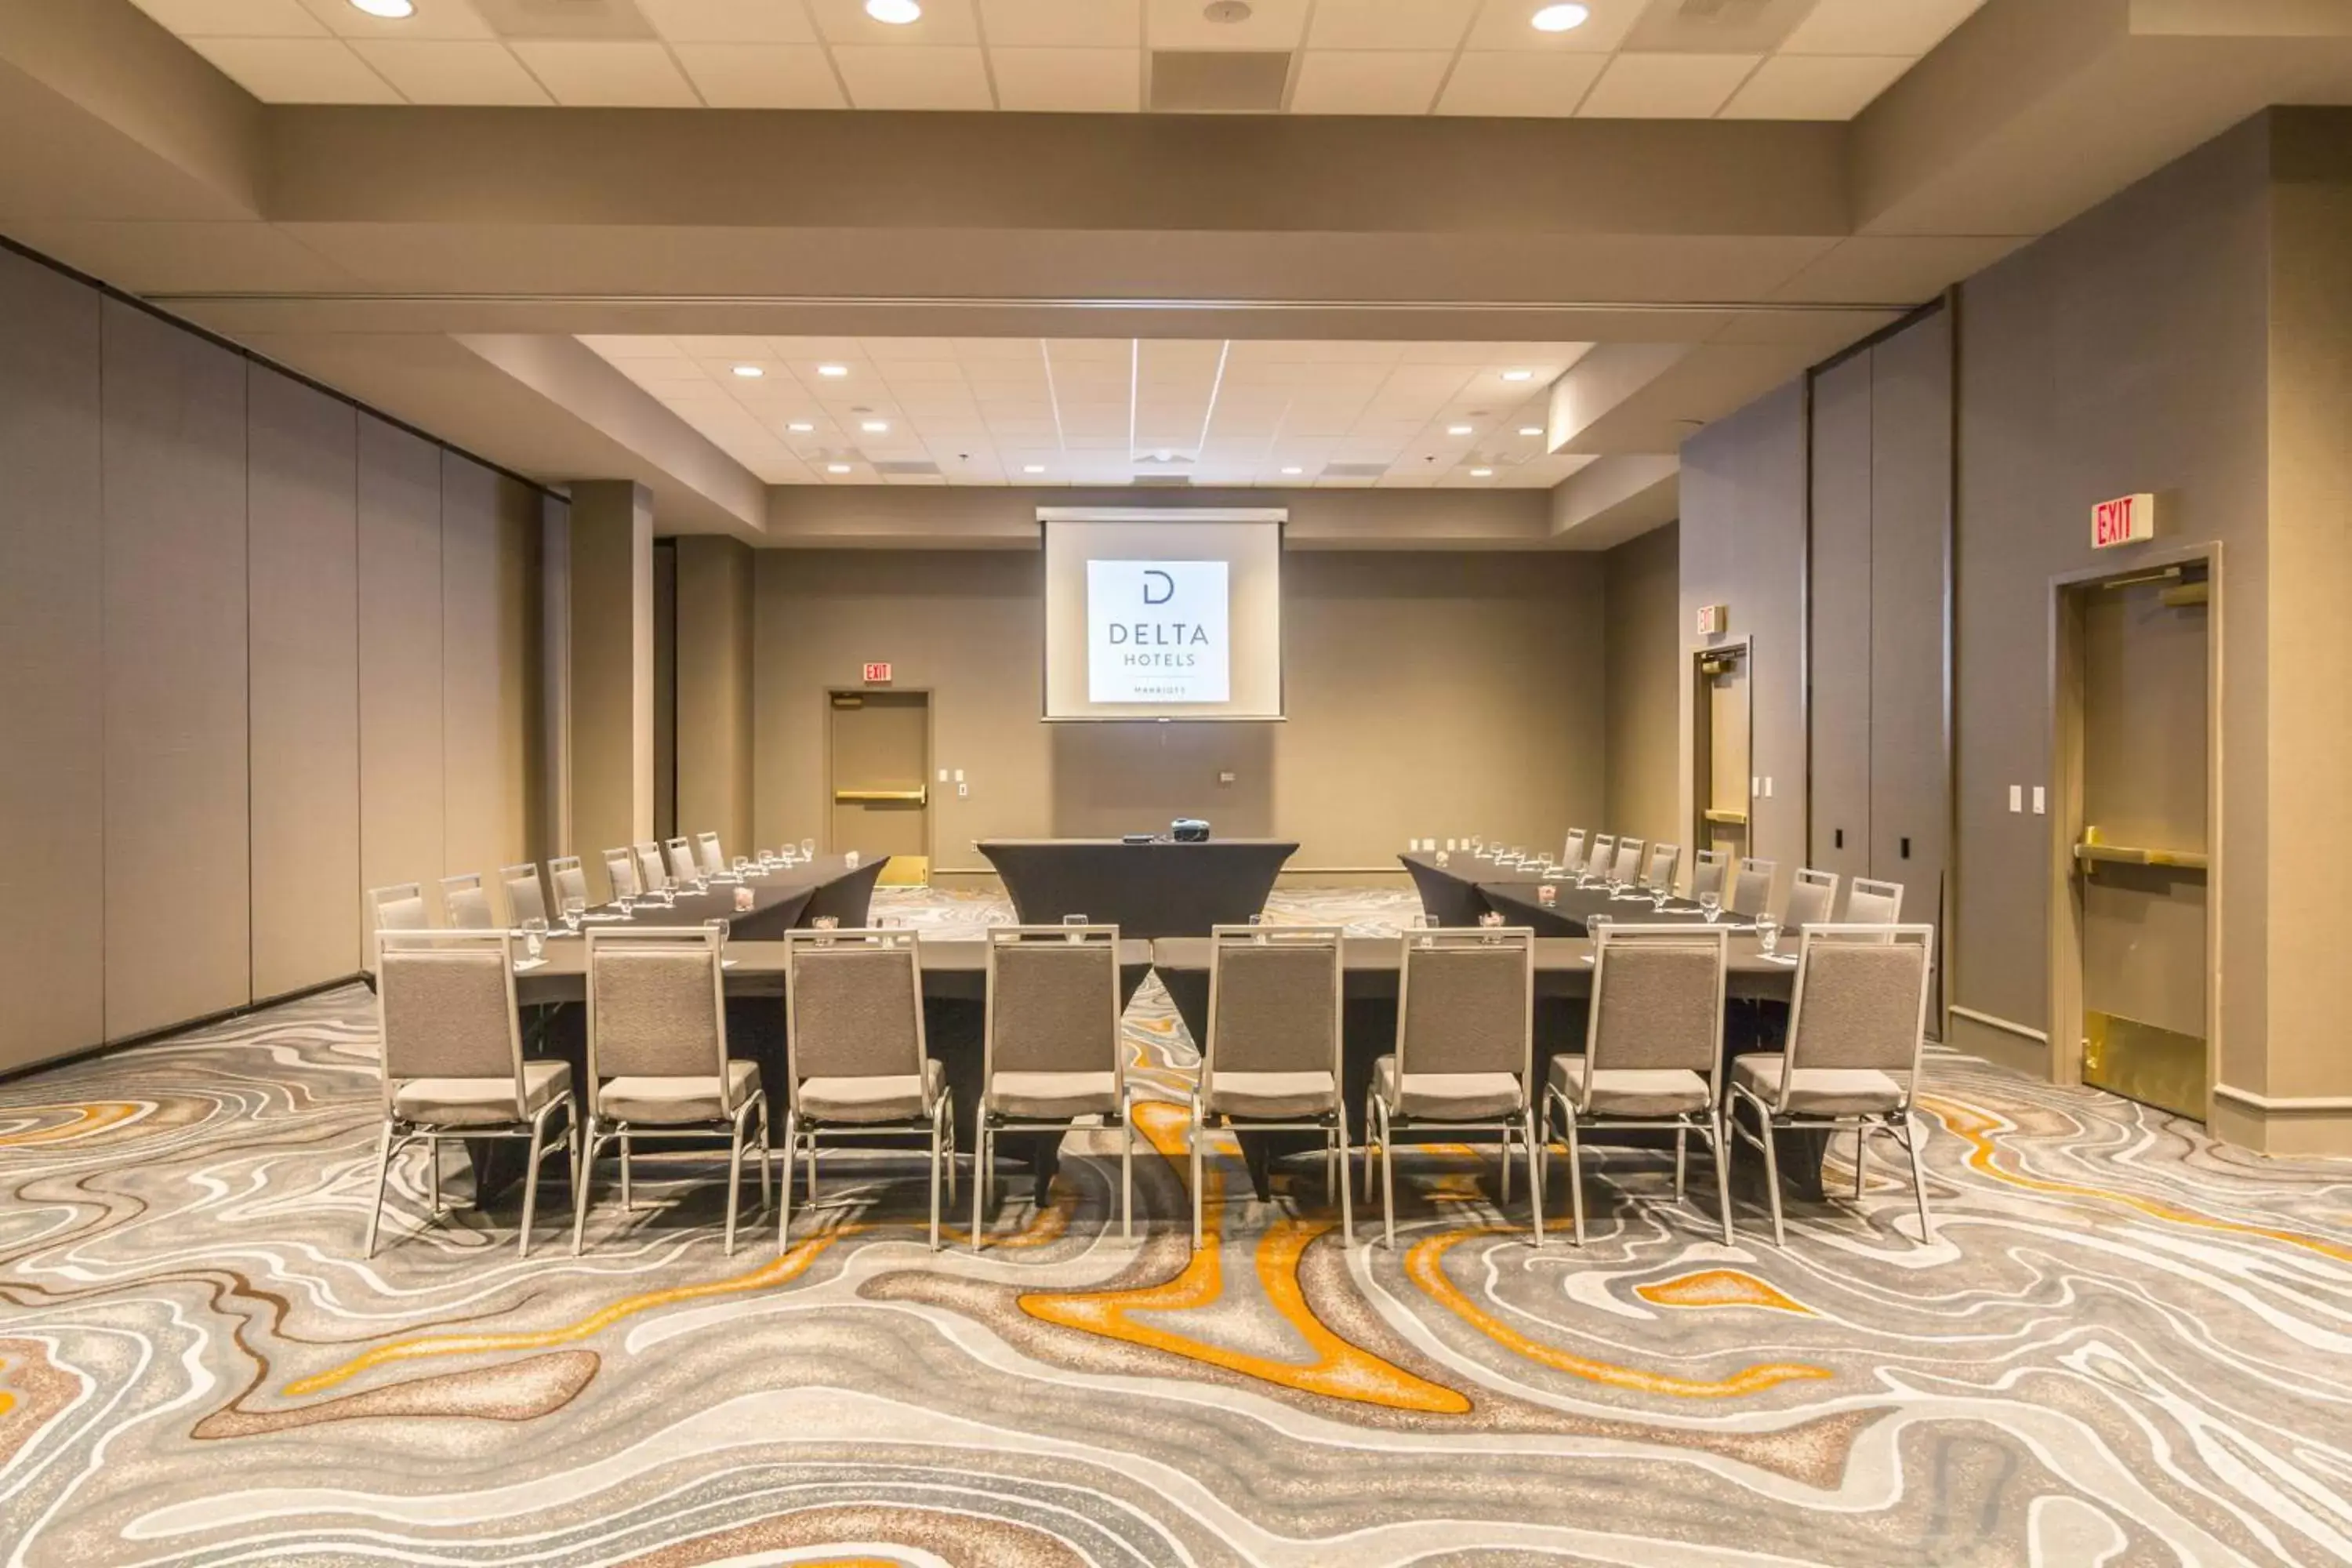 Meeting/conference room in Delta Hotels by Marriott Fargo